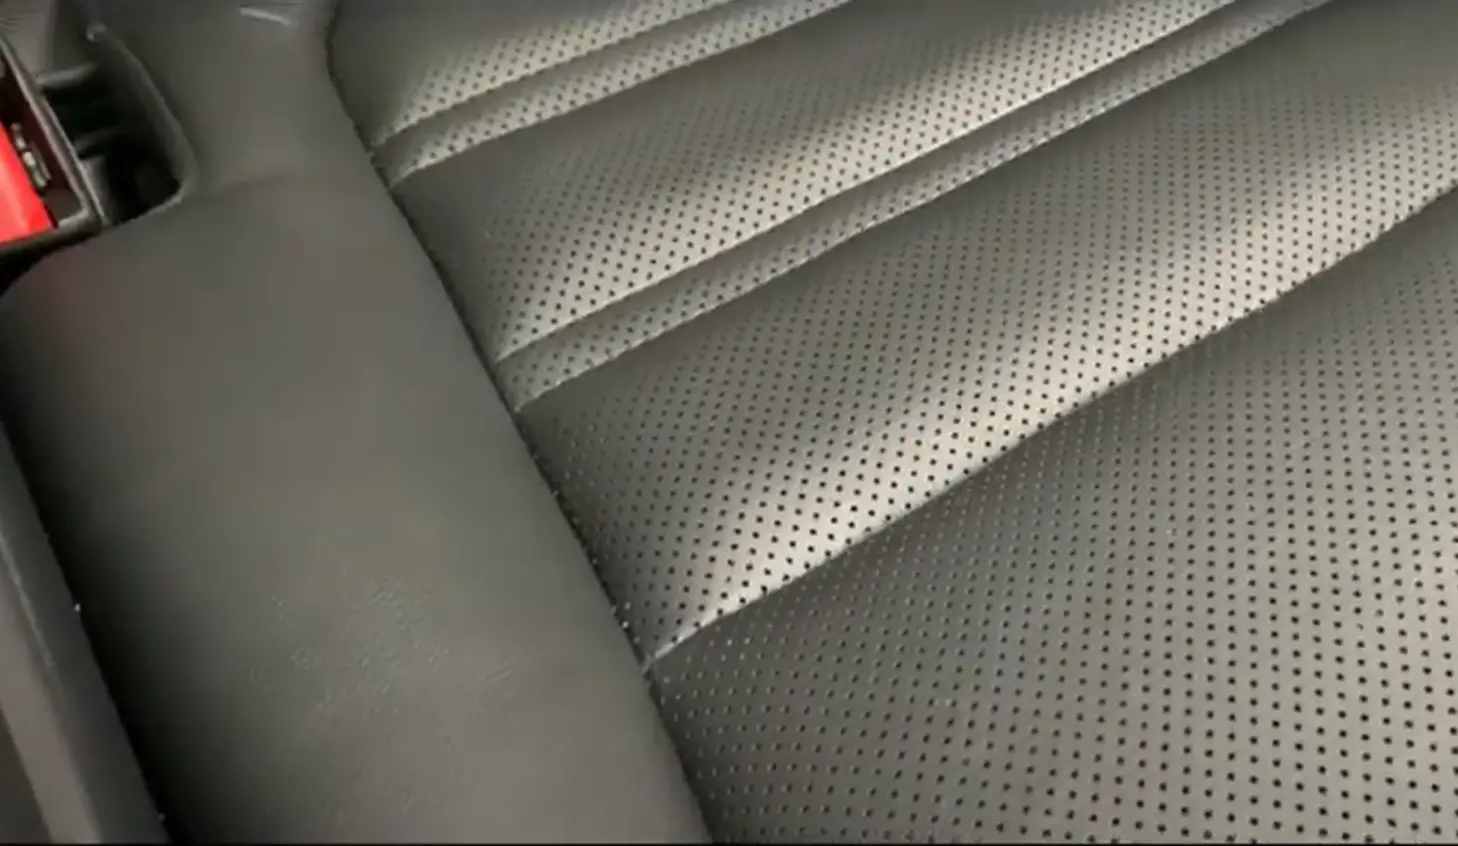 How To Remove Odor From Perforated Leather Car Seats?